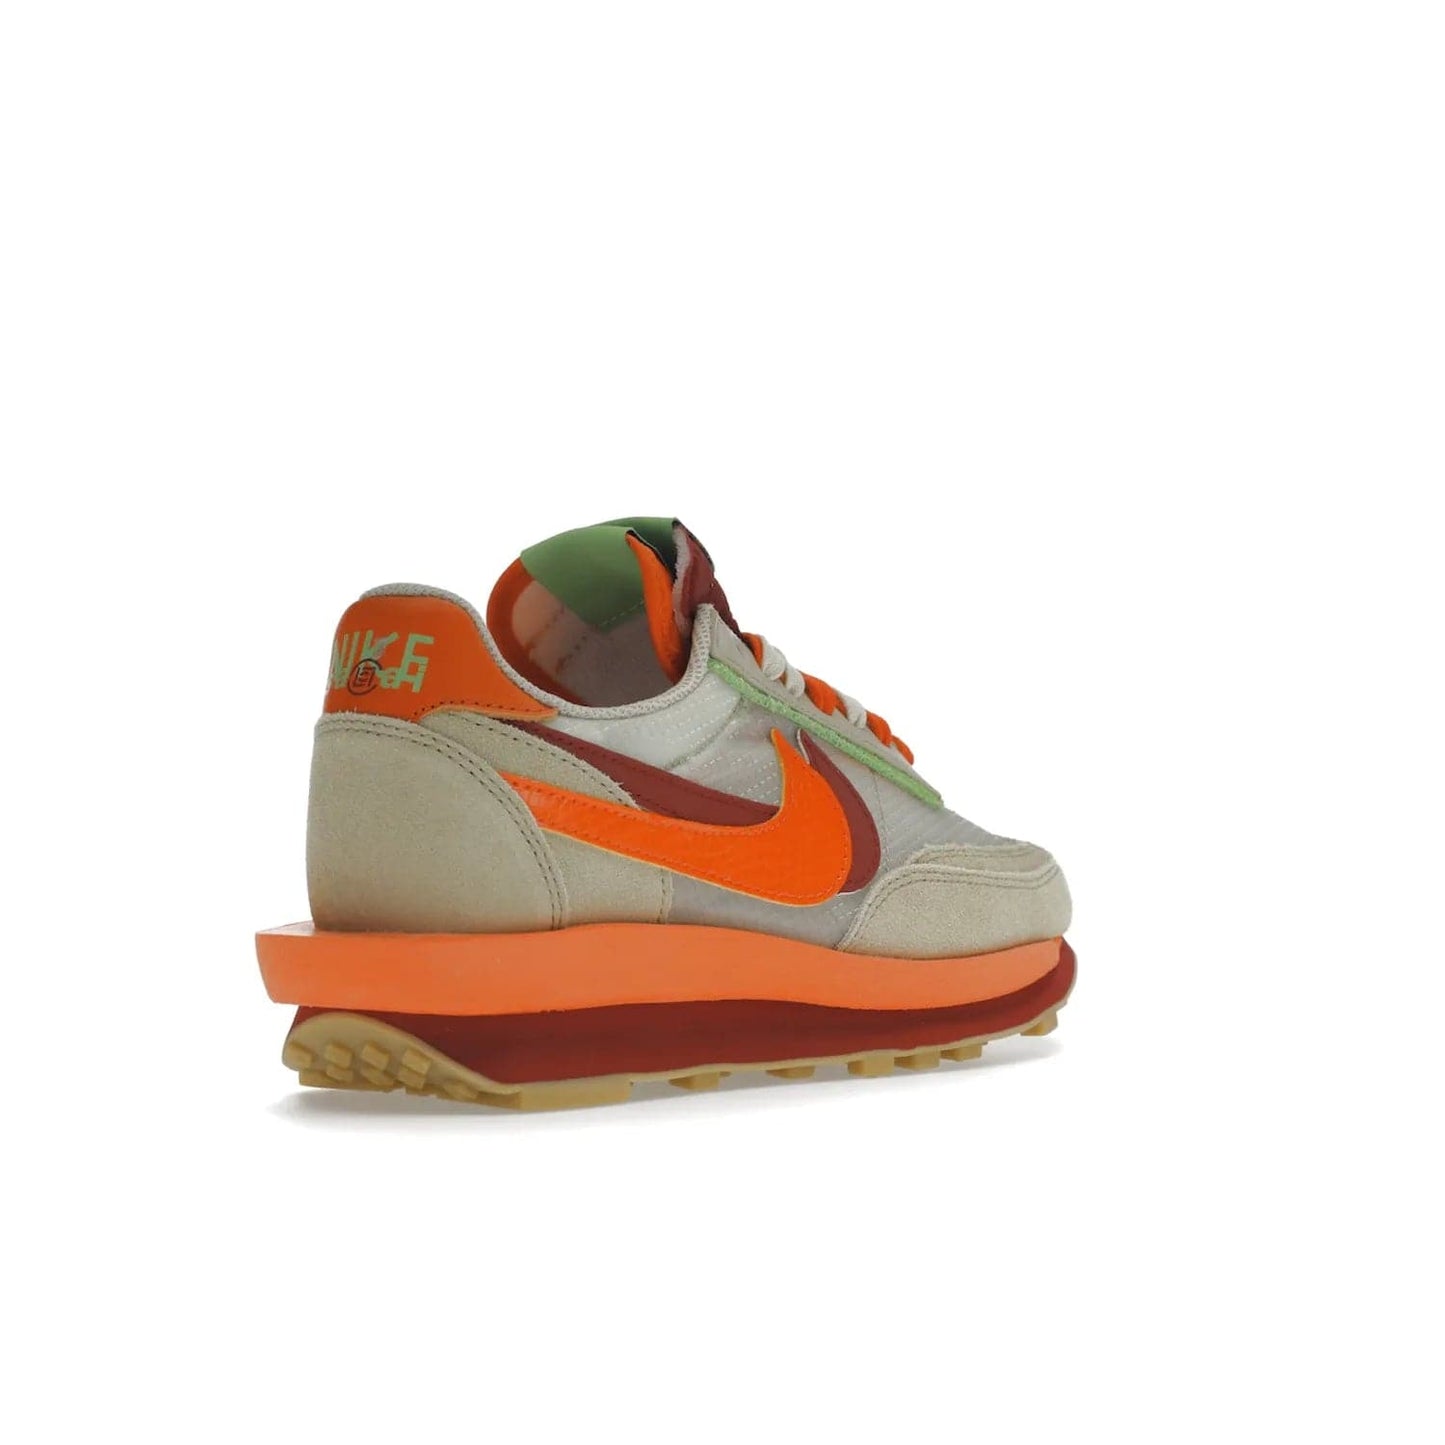 Nike LD Waffle sacai CLOT Kiss of Death Net Orange Blaze - Image 32 - Only at www.BallersClubKickz.com - A bold and stylish Nike LD Waffle sacai CLOT Kiss of Death Net Orange Blaze sneaker featuring a unique off-white, Deep Red & Orange Blaze Swooshes, two-toned stacked sole and doubled tongue. Available in September 2021. Make a statement.